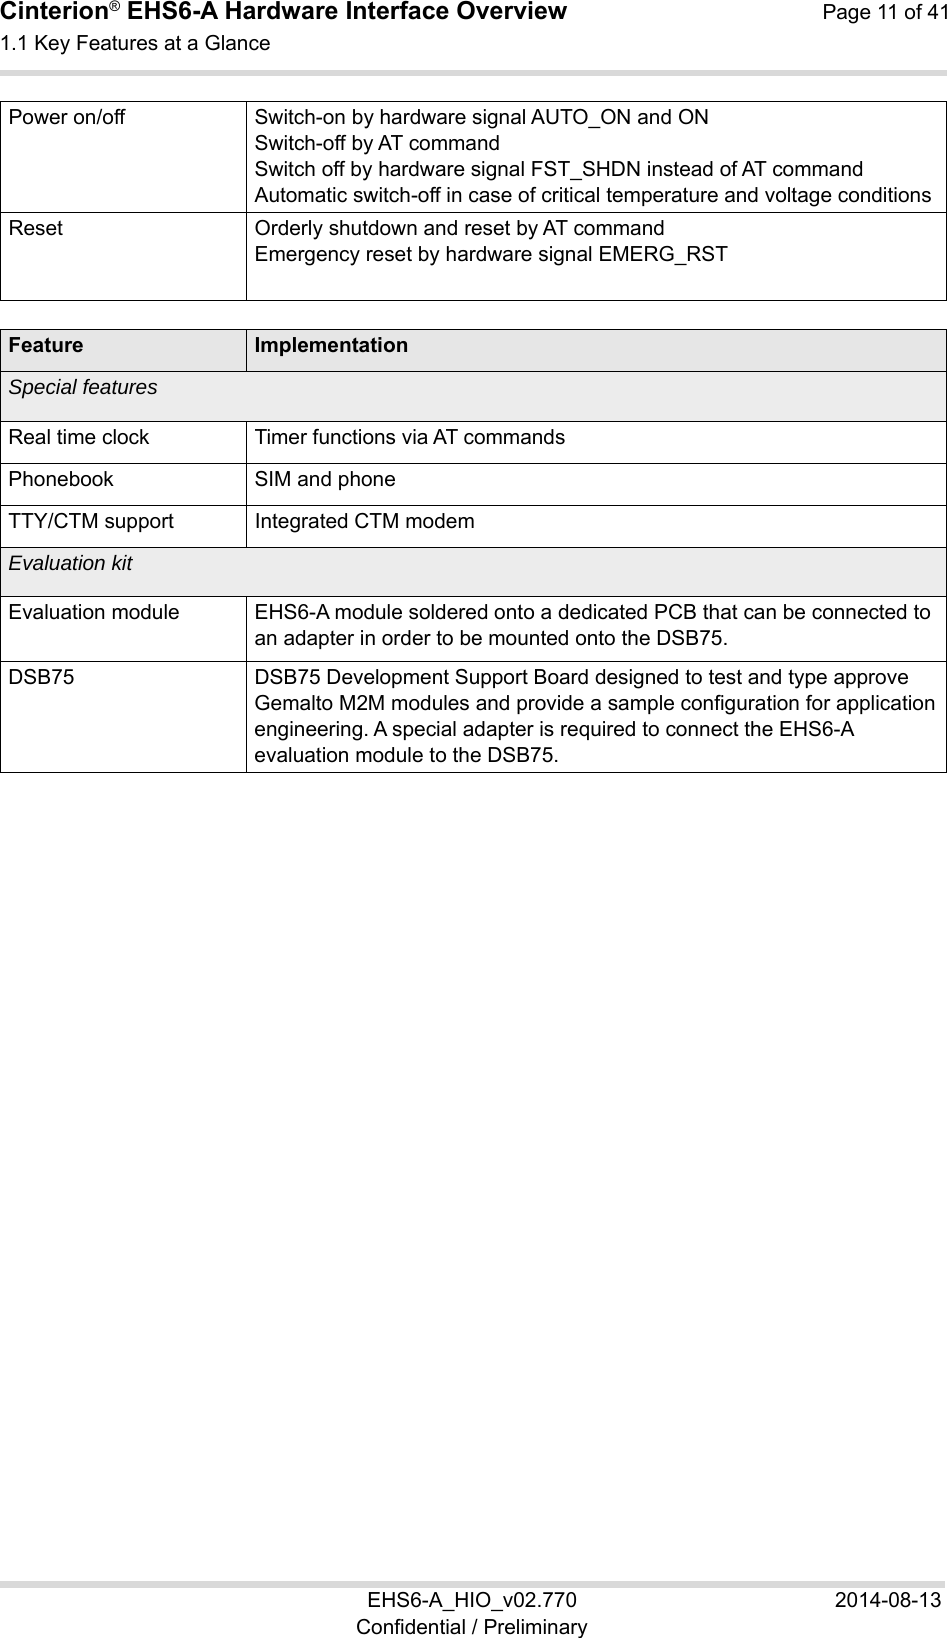 Cinterion® EHS6-A Hardware Interface Overview  Page 11 of 41 1.1 Key Features at a Glance 10 EHS6-A_HIO_v02.770  2014-08-13 Confidential / Preliminary Power on/off Switch-on by hardware signal AUTO_ON and ONSwitch-off by AT command  Switch off by hardware signal FST_SHDN instead of AT command Automatic switch-off in case of critical temperature and voltage conditions Reset Orderly shutdown and reset by AT commandEmergency reset by hardware signal EMERG_RST  Feature ImplementationSpecial features  Real time clock Timer functions via AT commandsPhonebook SIM and phoneTTY/CTM support Integrated CTM modemEvaluation kit  Evaluation module EHS6-A module soldered onto a dedicated PCB that can be connected to an adapter in order to be mounted onto the DSB75. DSB75 DSB75 Development Support Board designed to test and type approve Gemalto M2M modules and provide a sample configuration for application engineering. A special adapter is required to connect the EHS6-A evaluation module to the DSB75.   